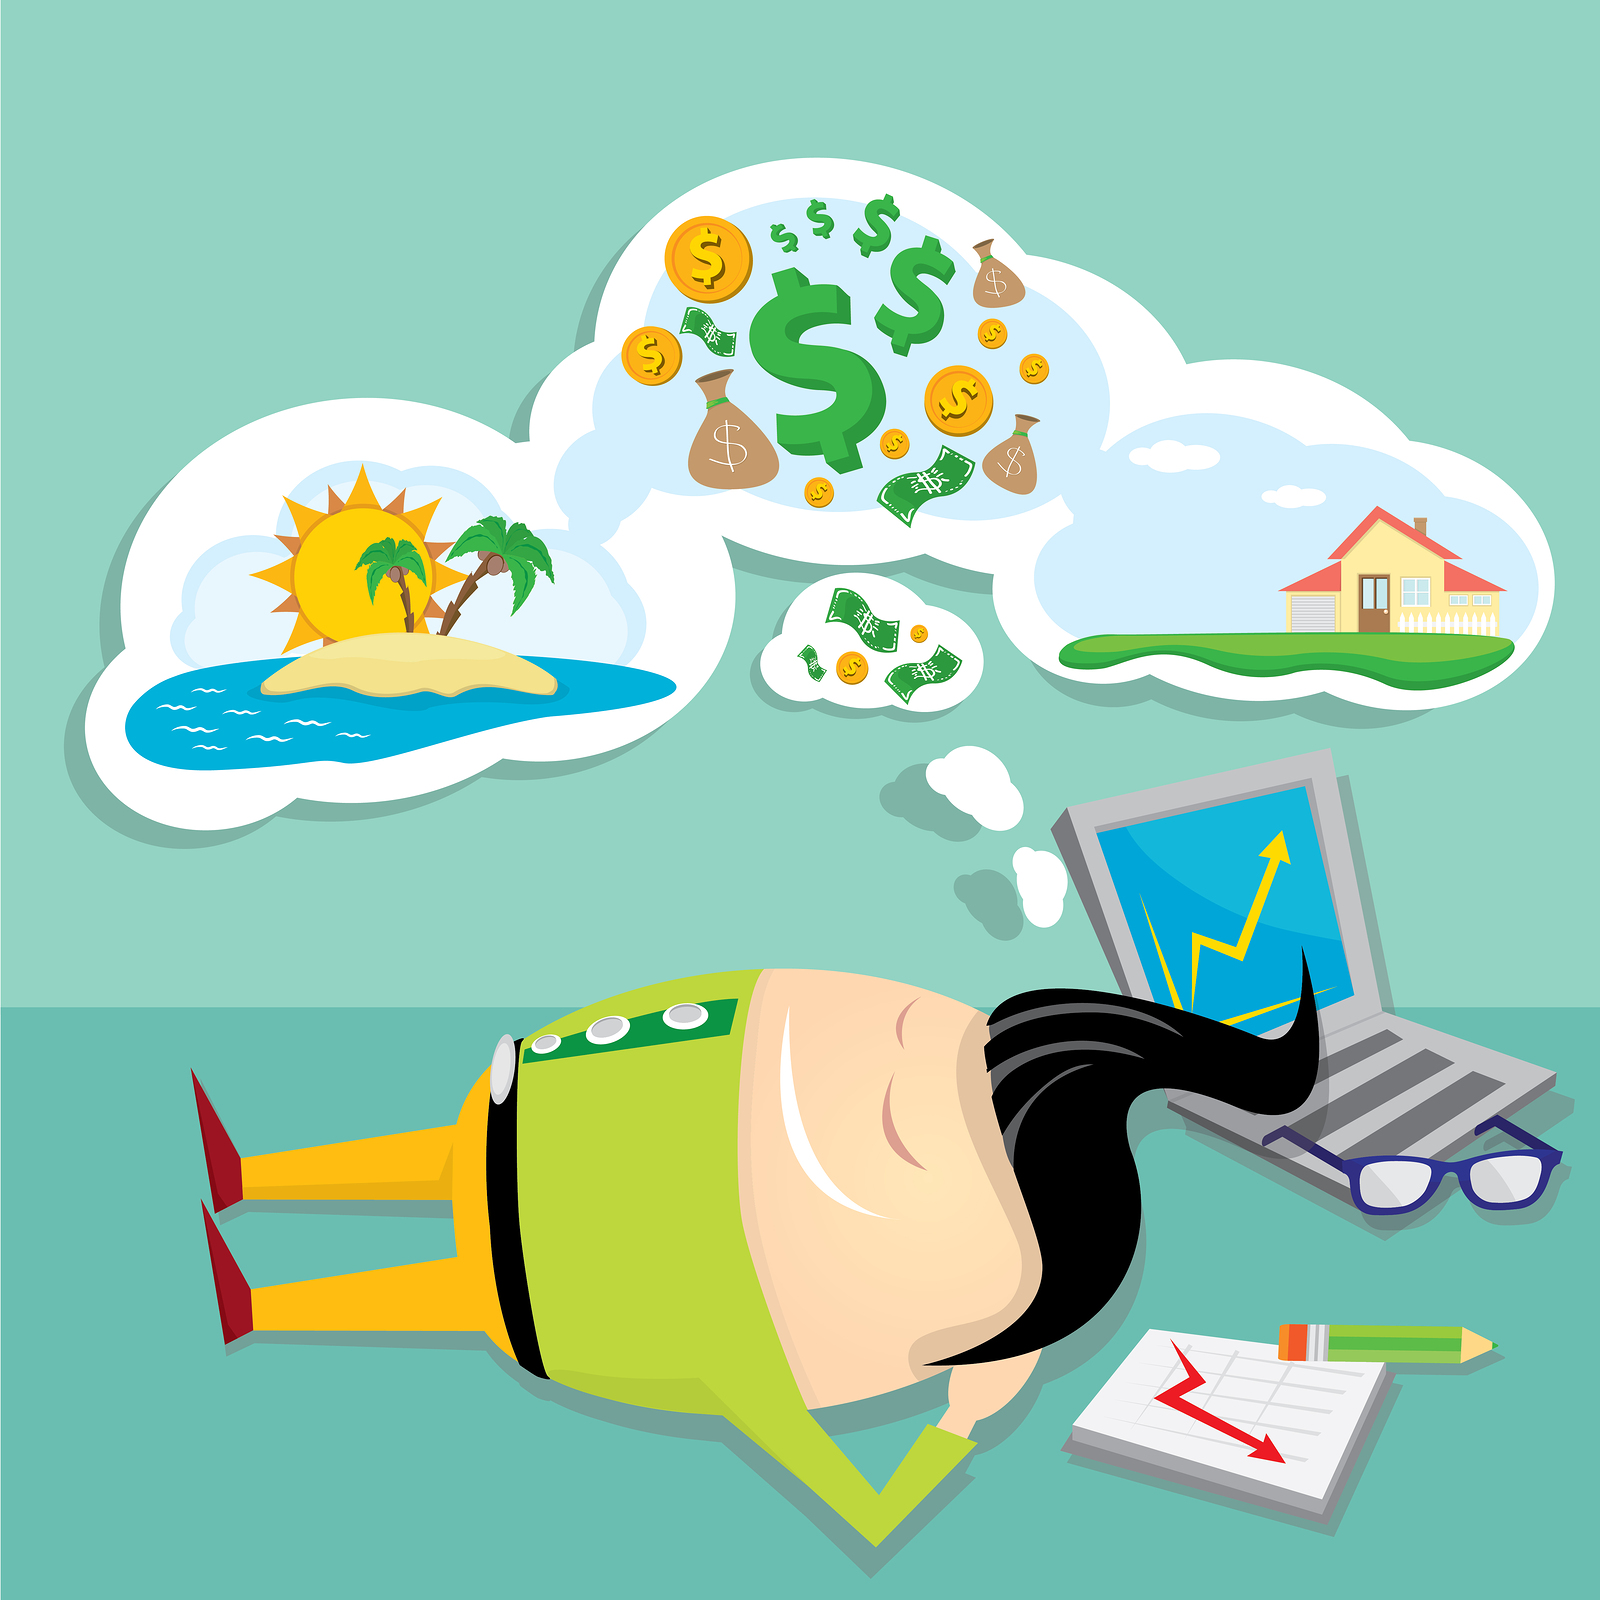 Business man dreaming. Concept of big dreams about money, house and travel. sweet dreams cartoon illustration